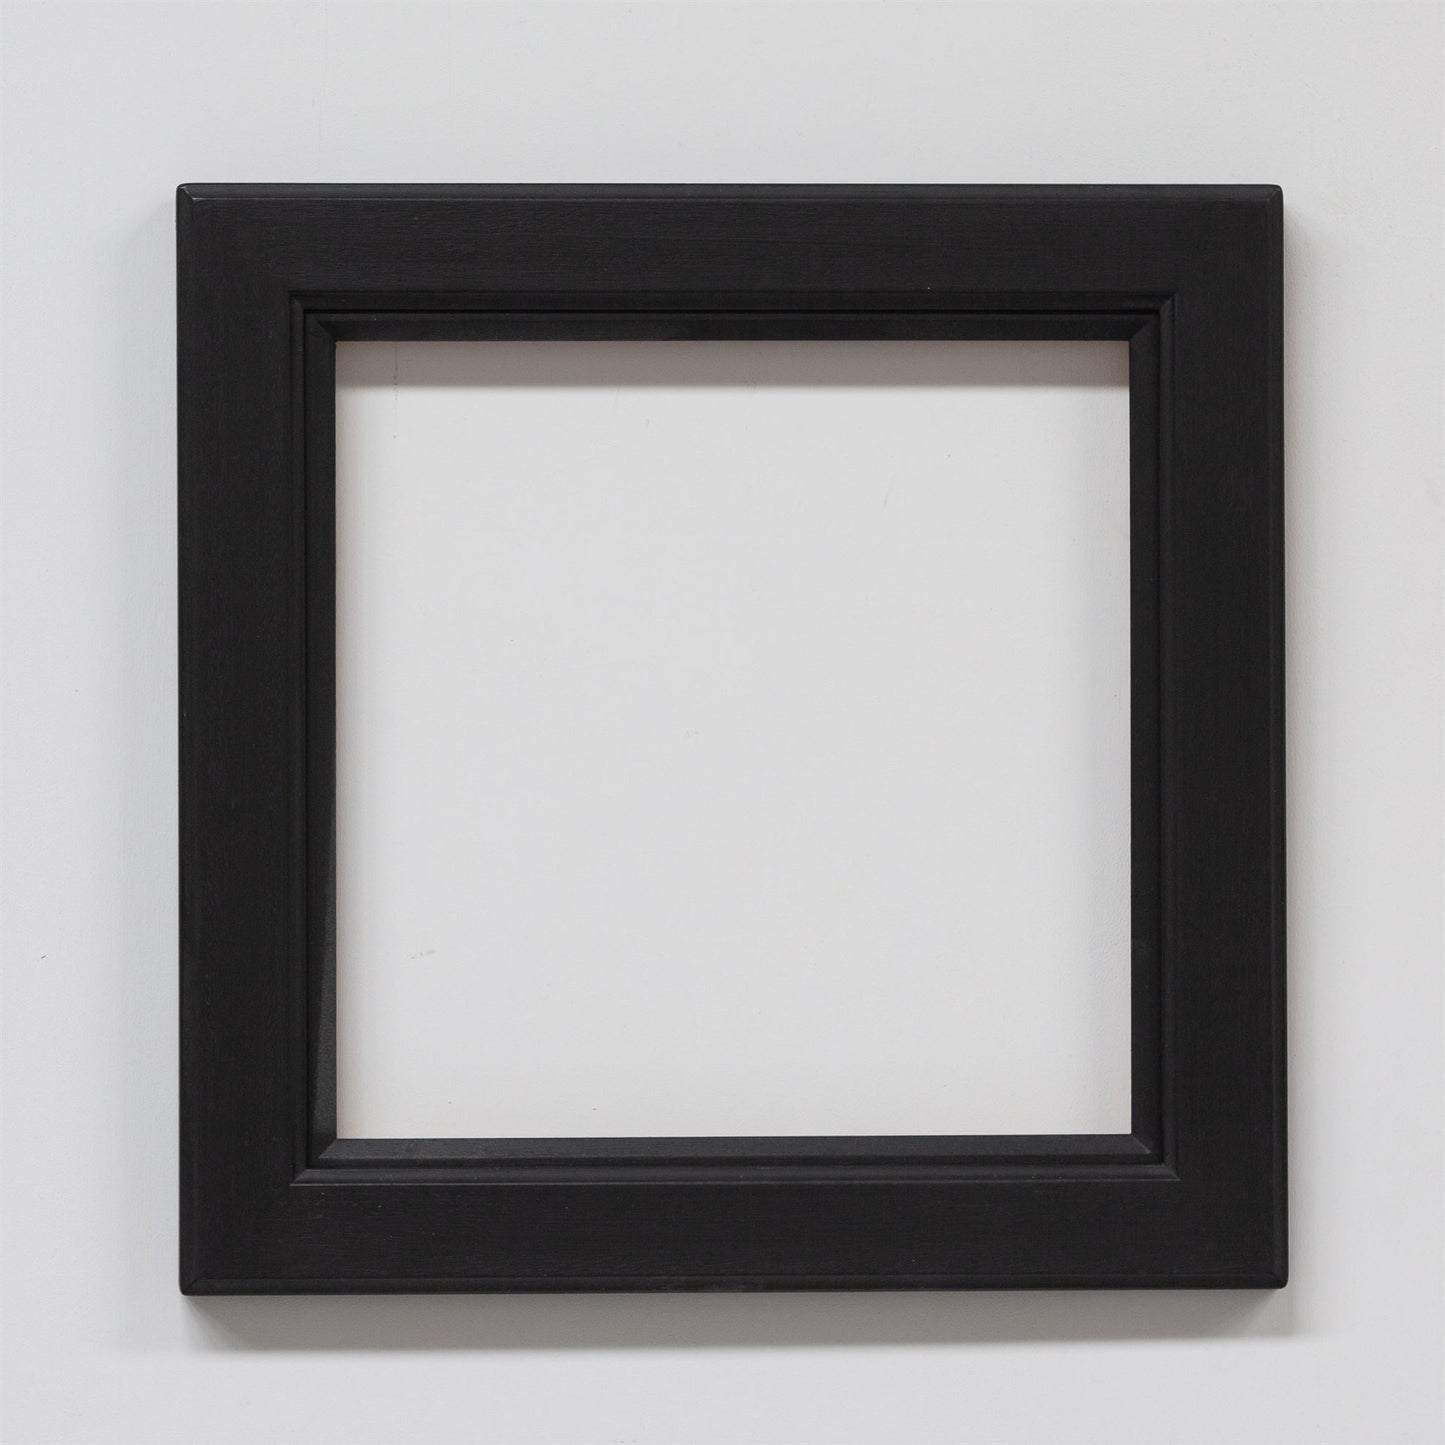 AB10 Standard Painted Frames